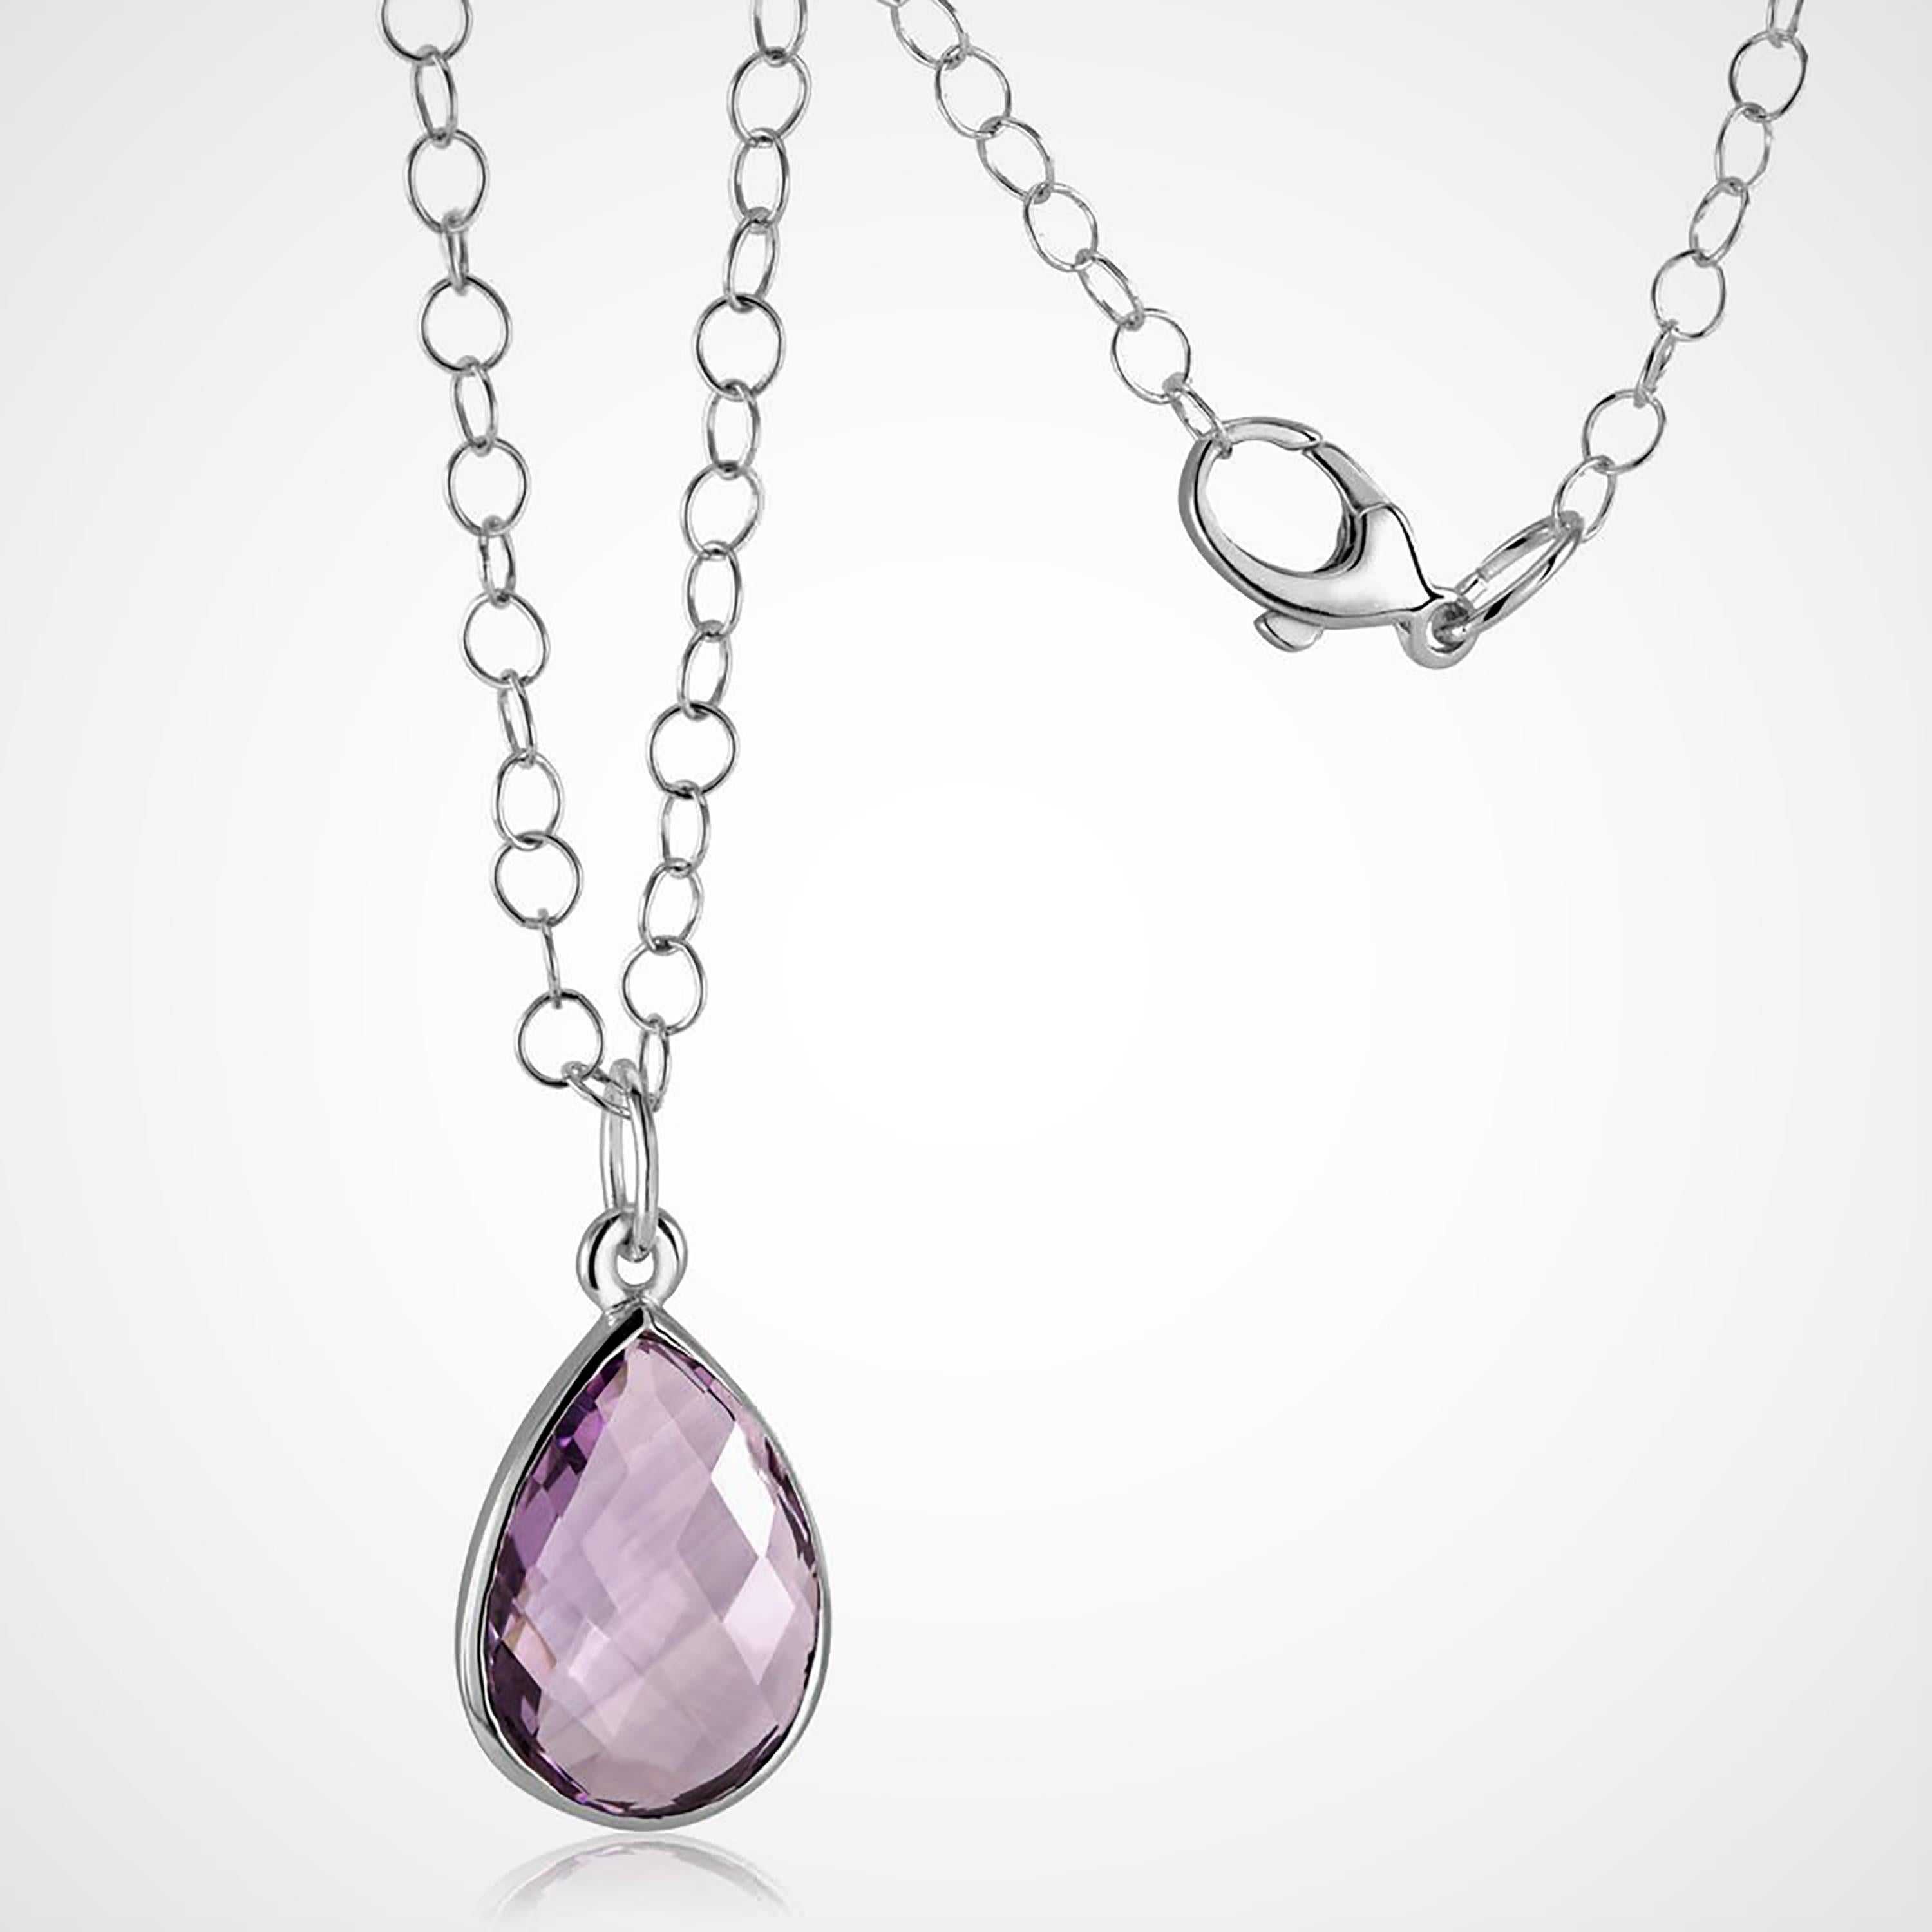 Contemporary Double Sided Briolette Pear Shaped Amethyst Silver Pendant Necklace